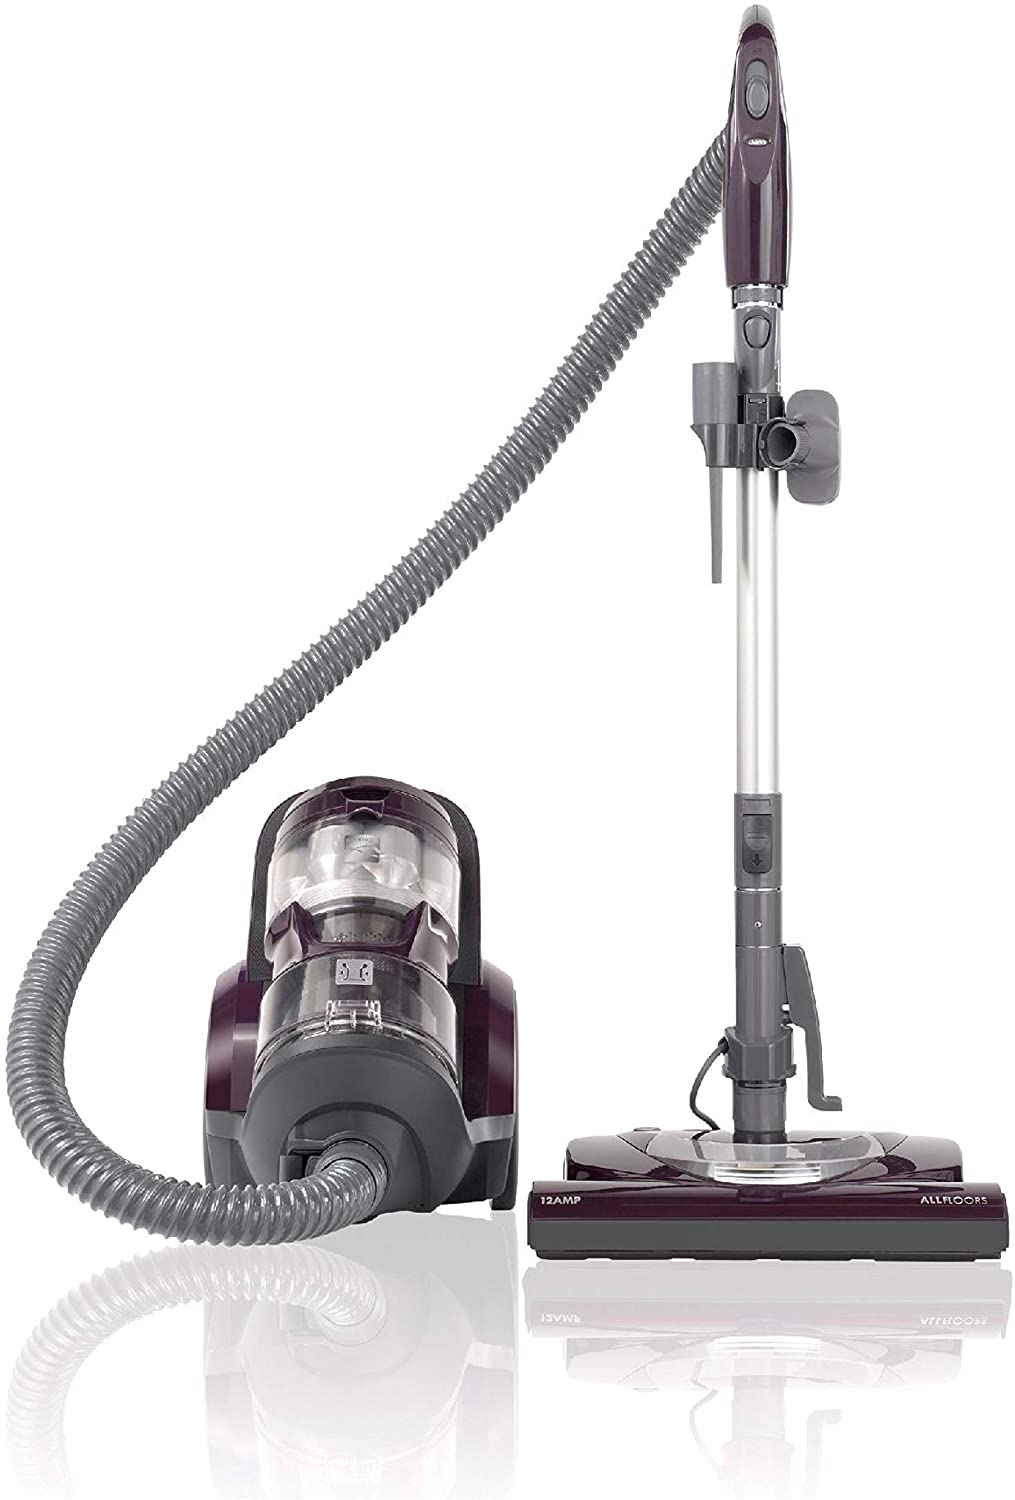 Best Vacuums for Maid Services: Tips from our ZenMaid Community